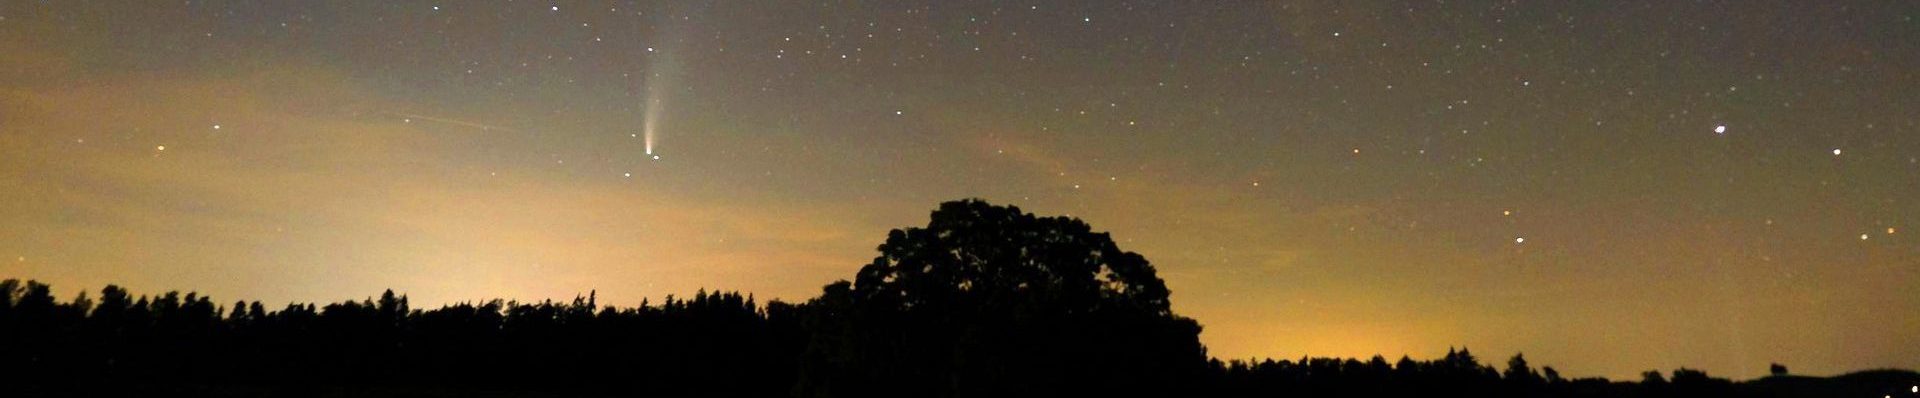 How to take photos of stars? Master your phone astrophotography